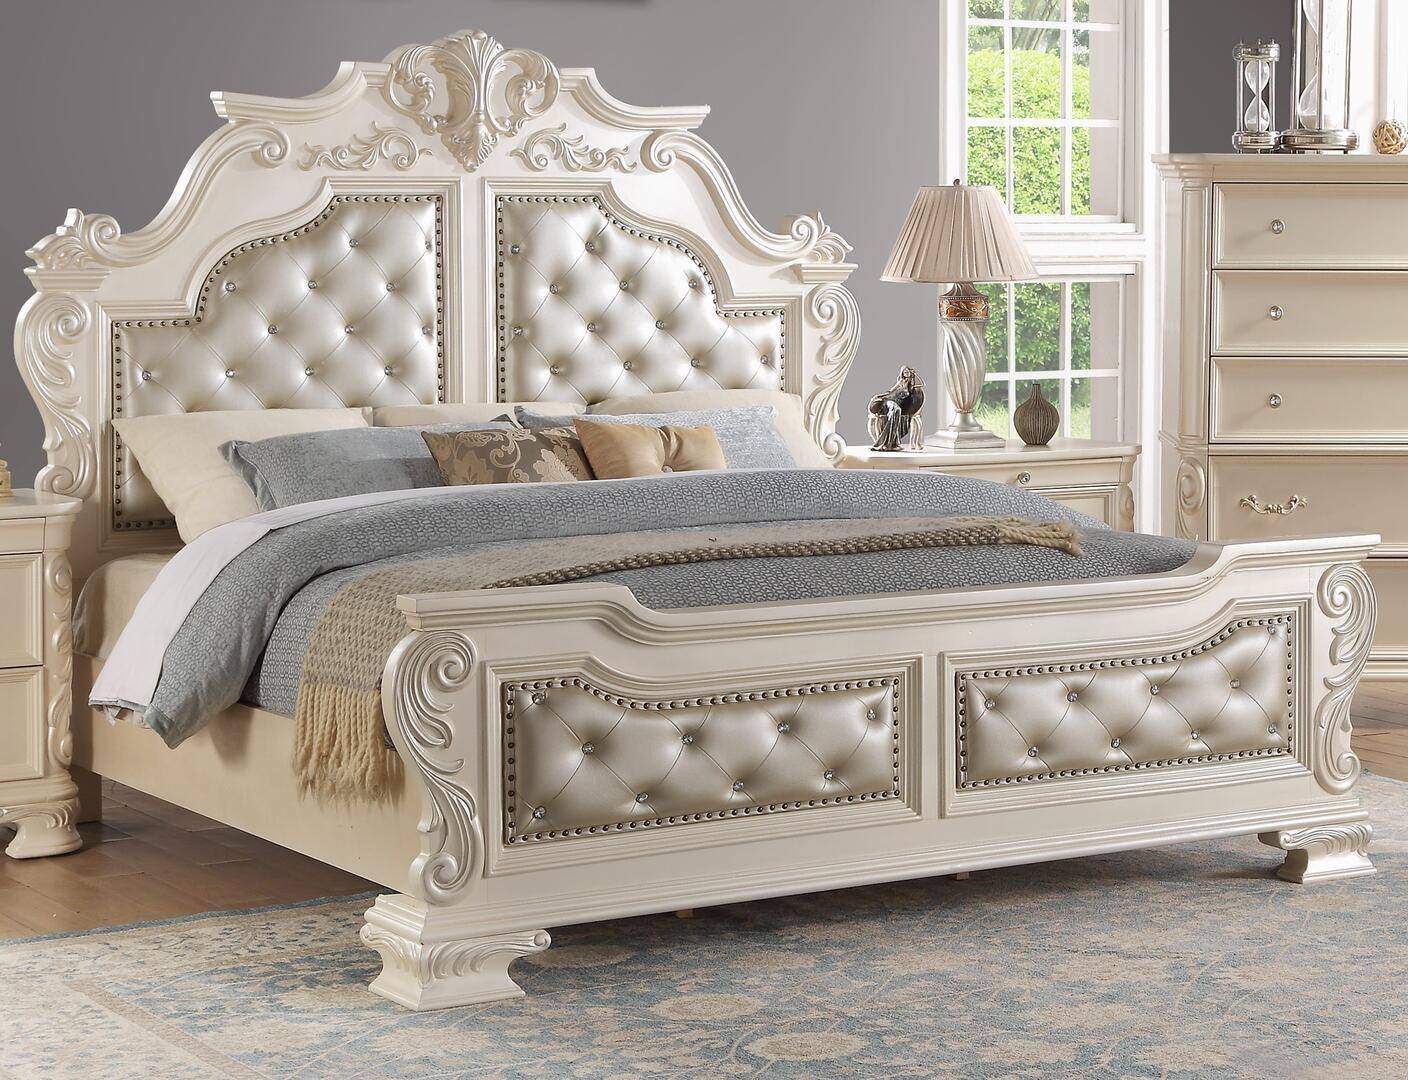 Buy Cosmos Furniture Victoria King Panel Bedroom Set 3 Pcs in White